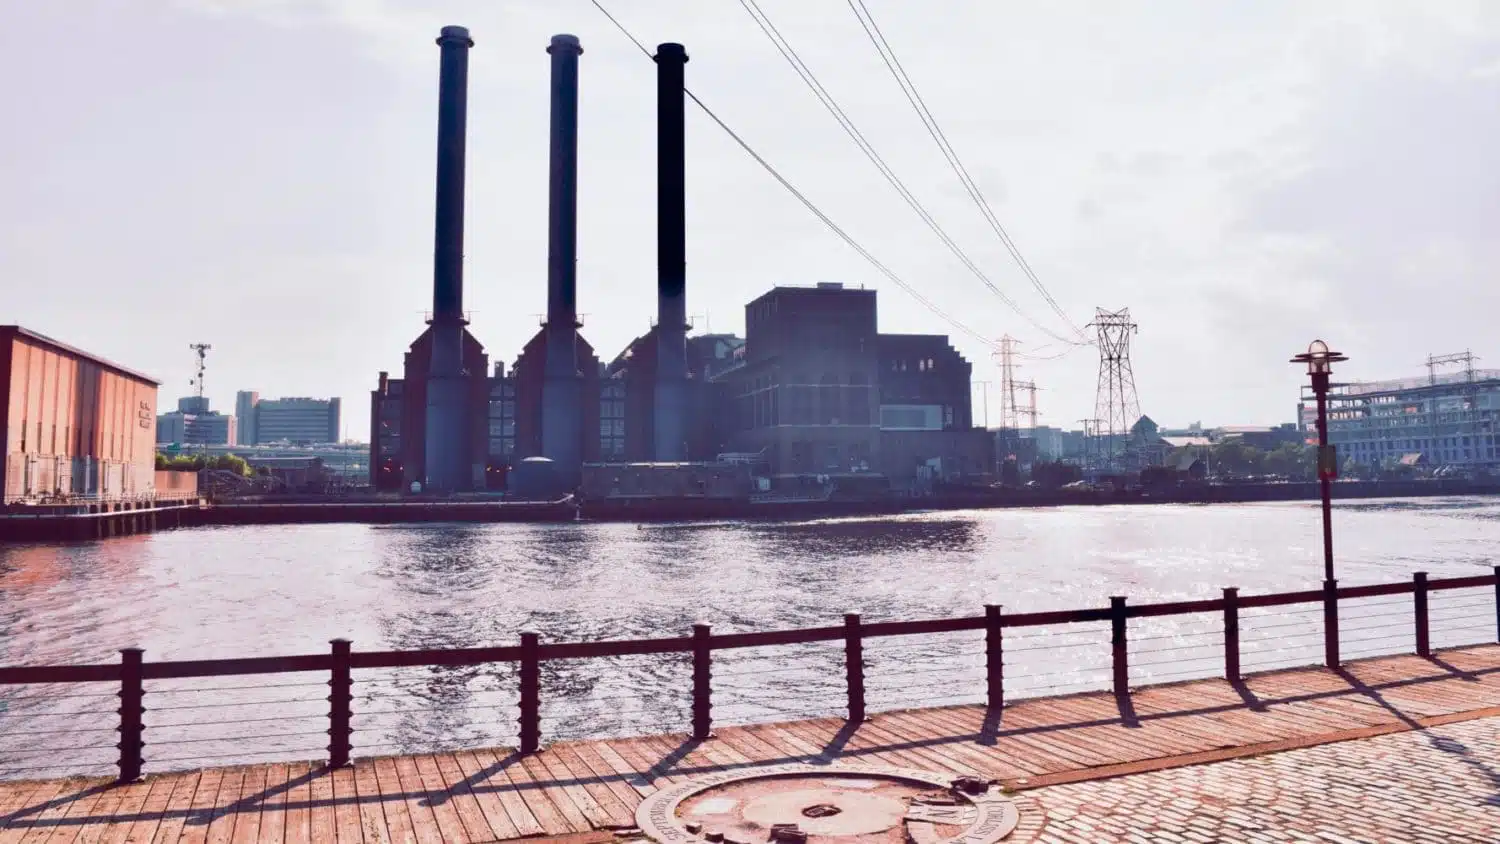 Starwood Energy Group to acquire Manchester Street Power Station from Dominion as part of a $1.23 billion deal